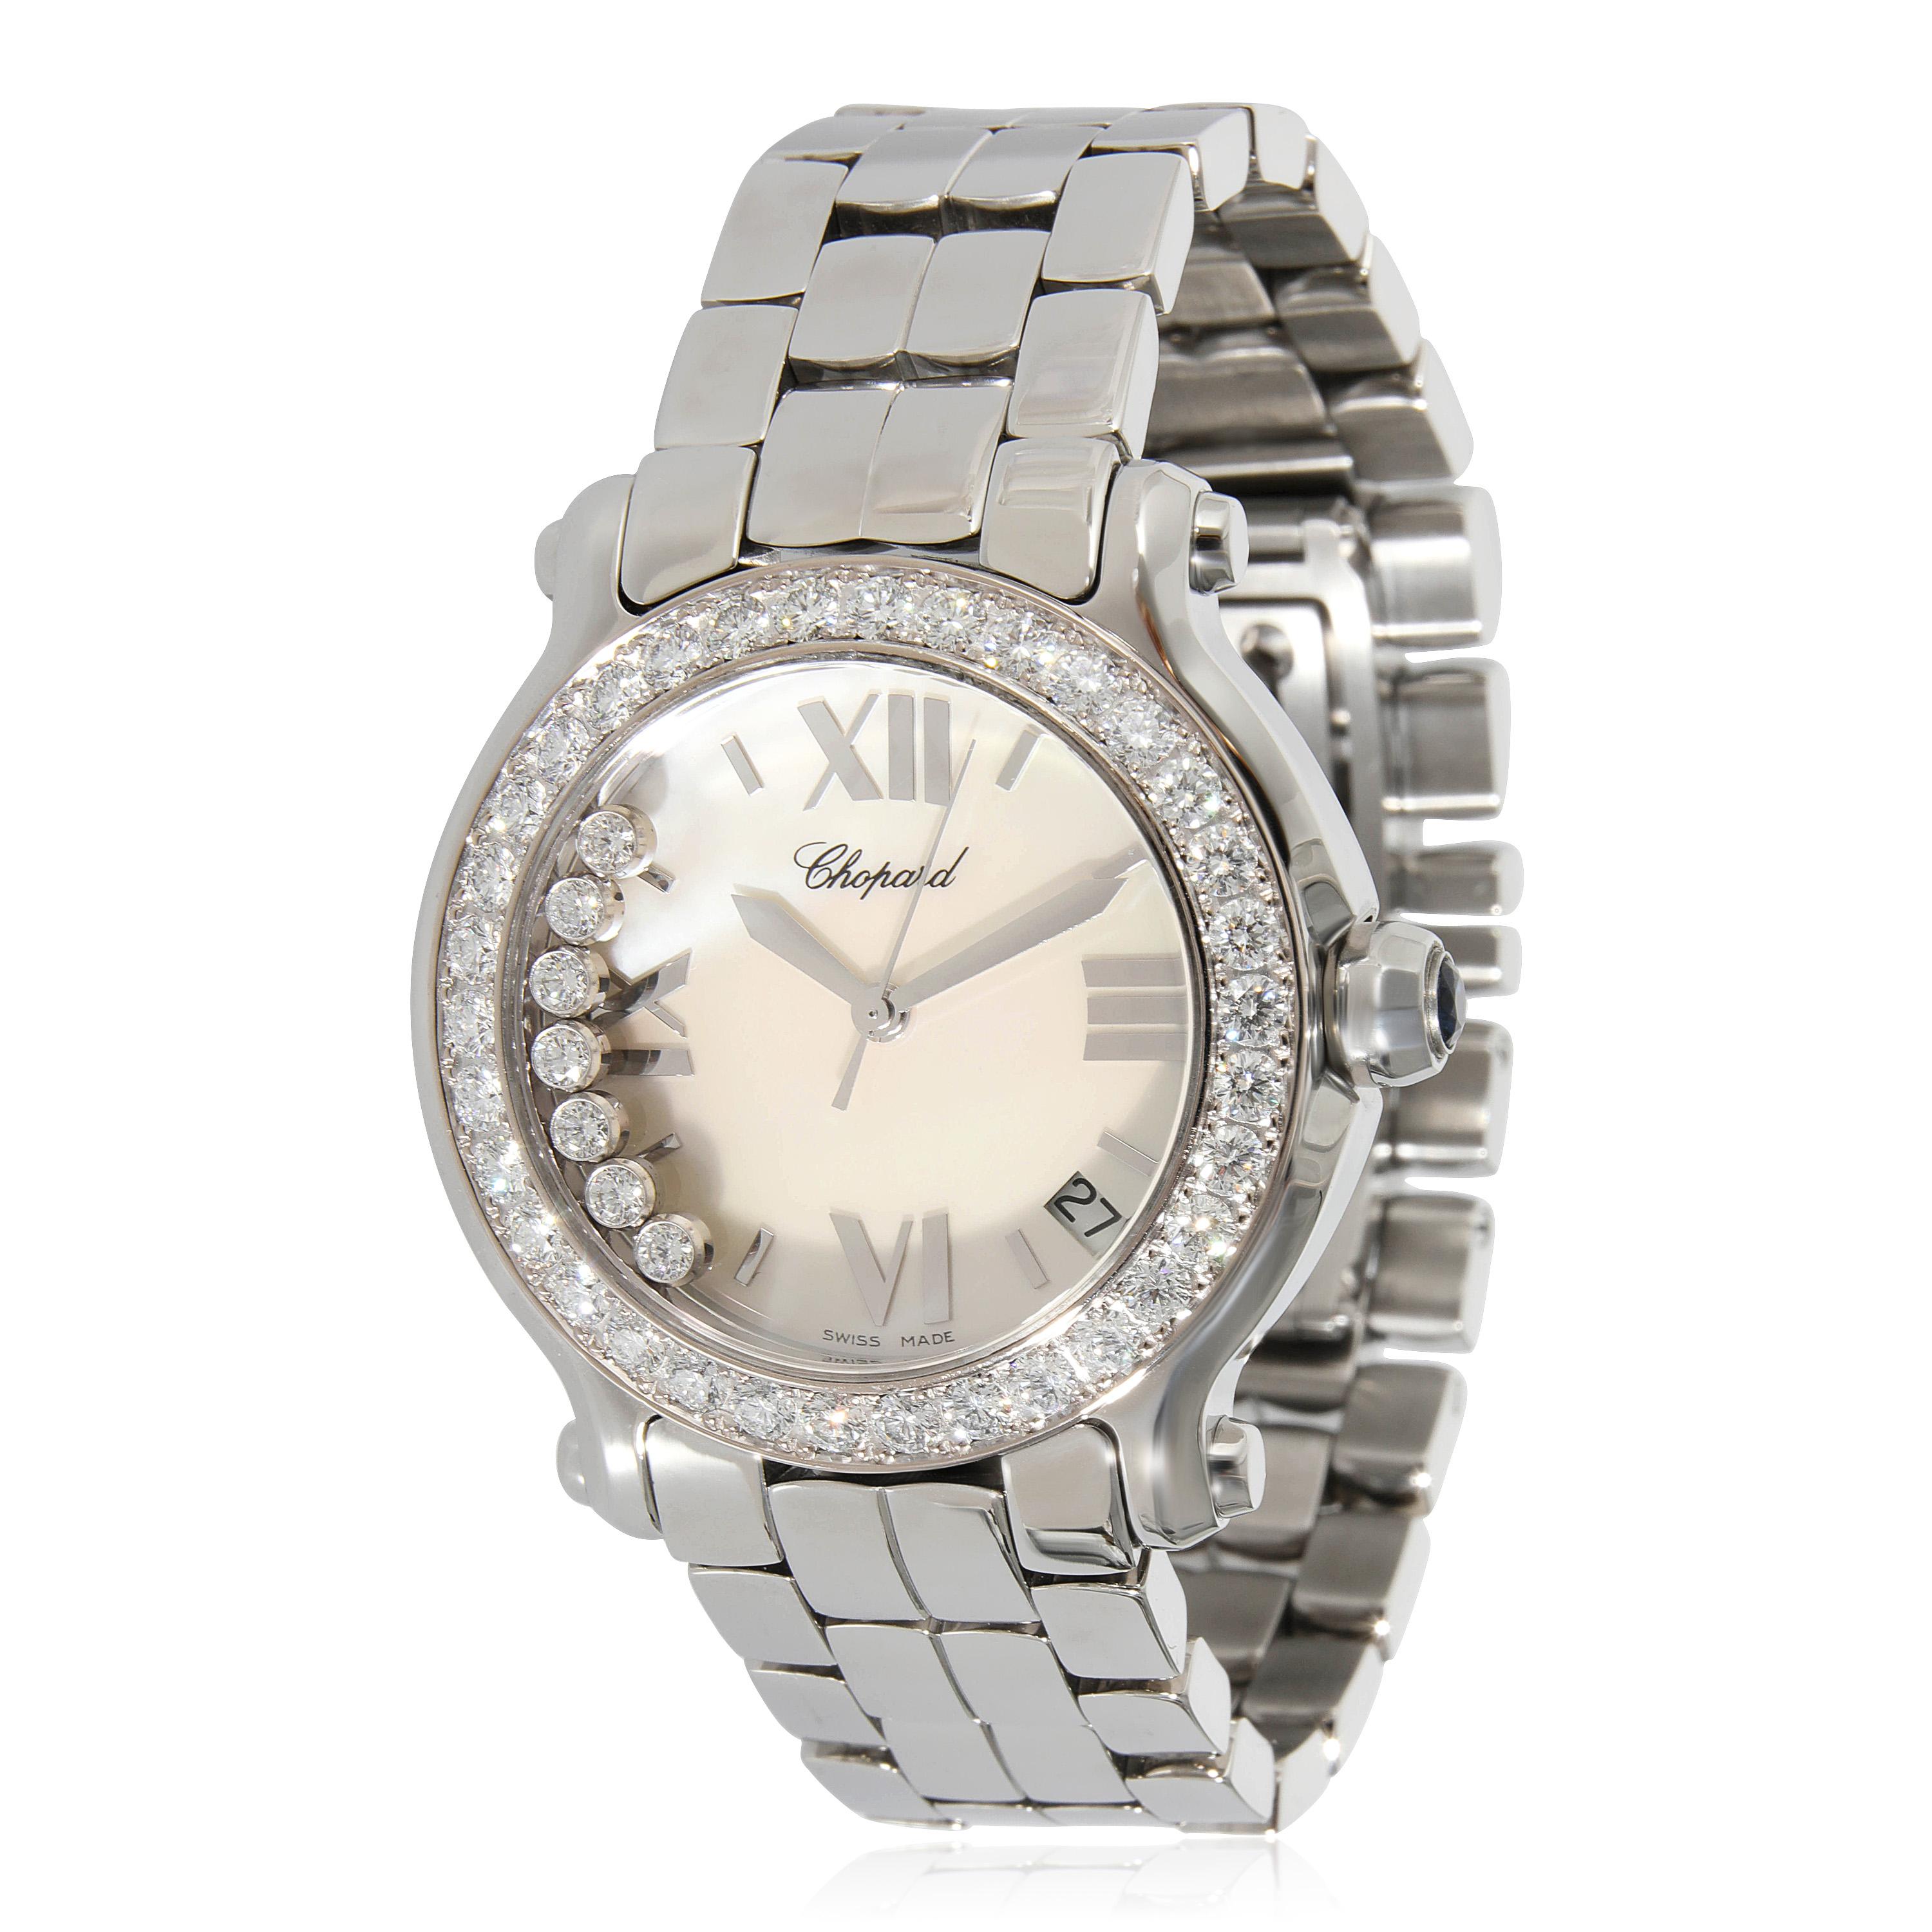 Chopard Happy Sport 6408 Unisex Watch in  Stainless Steel/White Gold

SKU: 128039

PRIMARY DETAILS
Brand: Chopard
Model: Happy Sport
Country of Origin: Switzerland
Movement Type: Quartz: Battery
Year of Manufacture: 2010-2019
Condition: Since 1993,